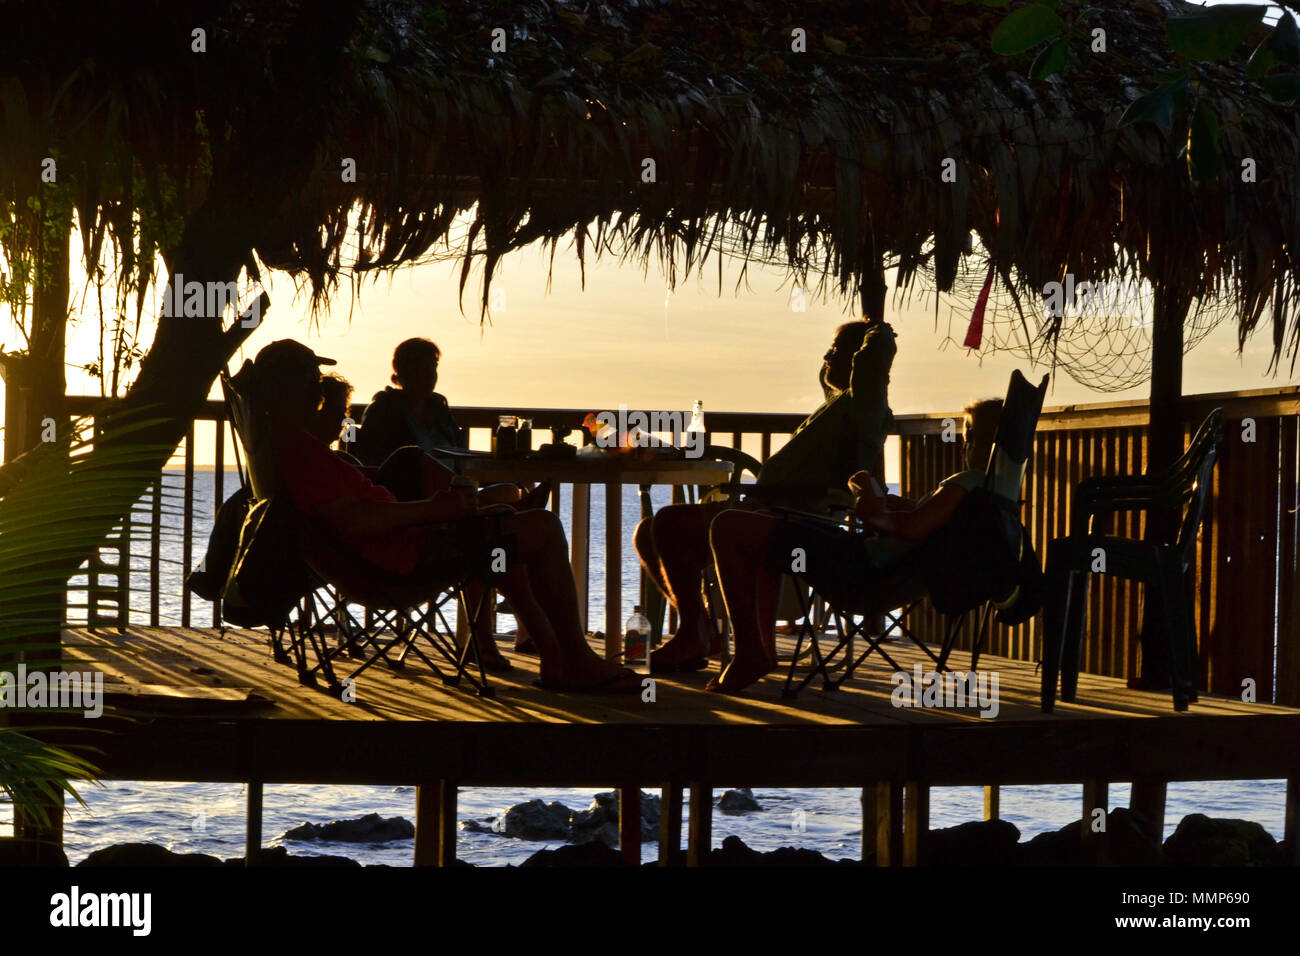 People enjoying the sunset from a bungalow by the beach, Black Coral Island, Pohnpei, Federated States of Micronesia Stock Photo